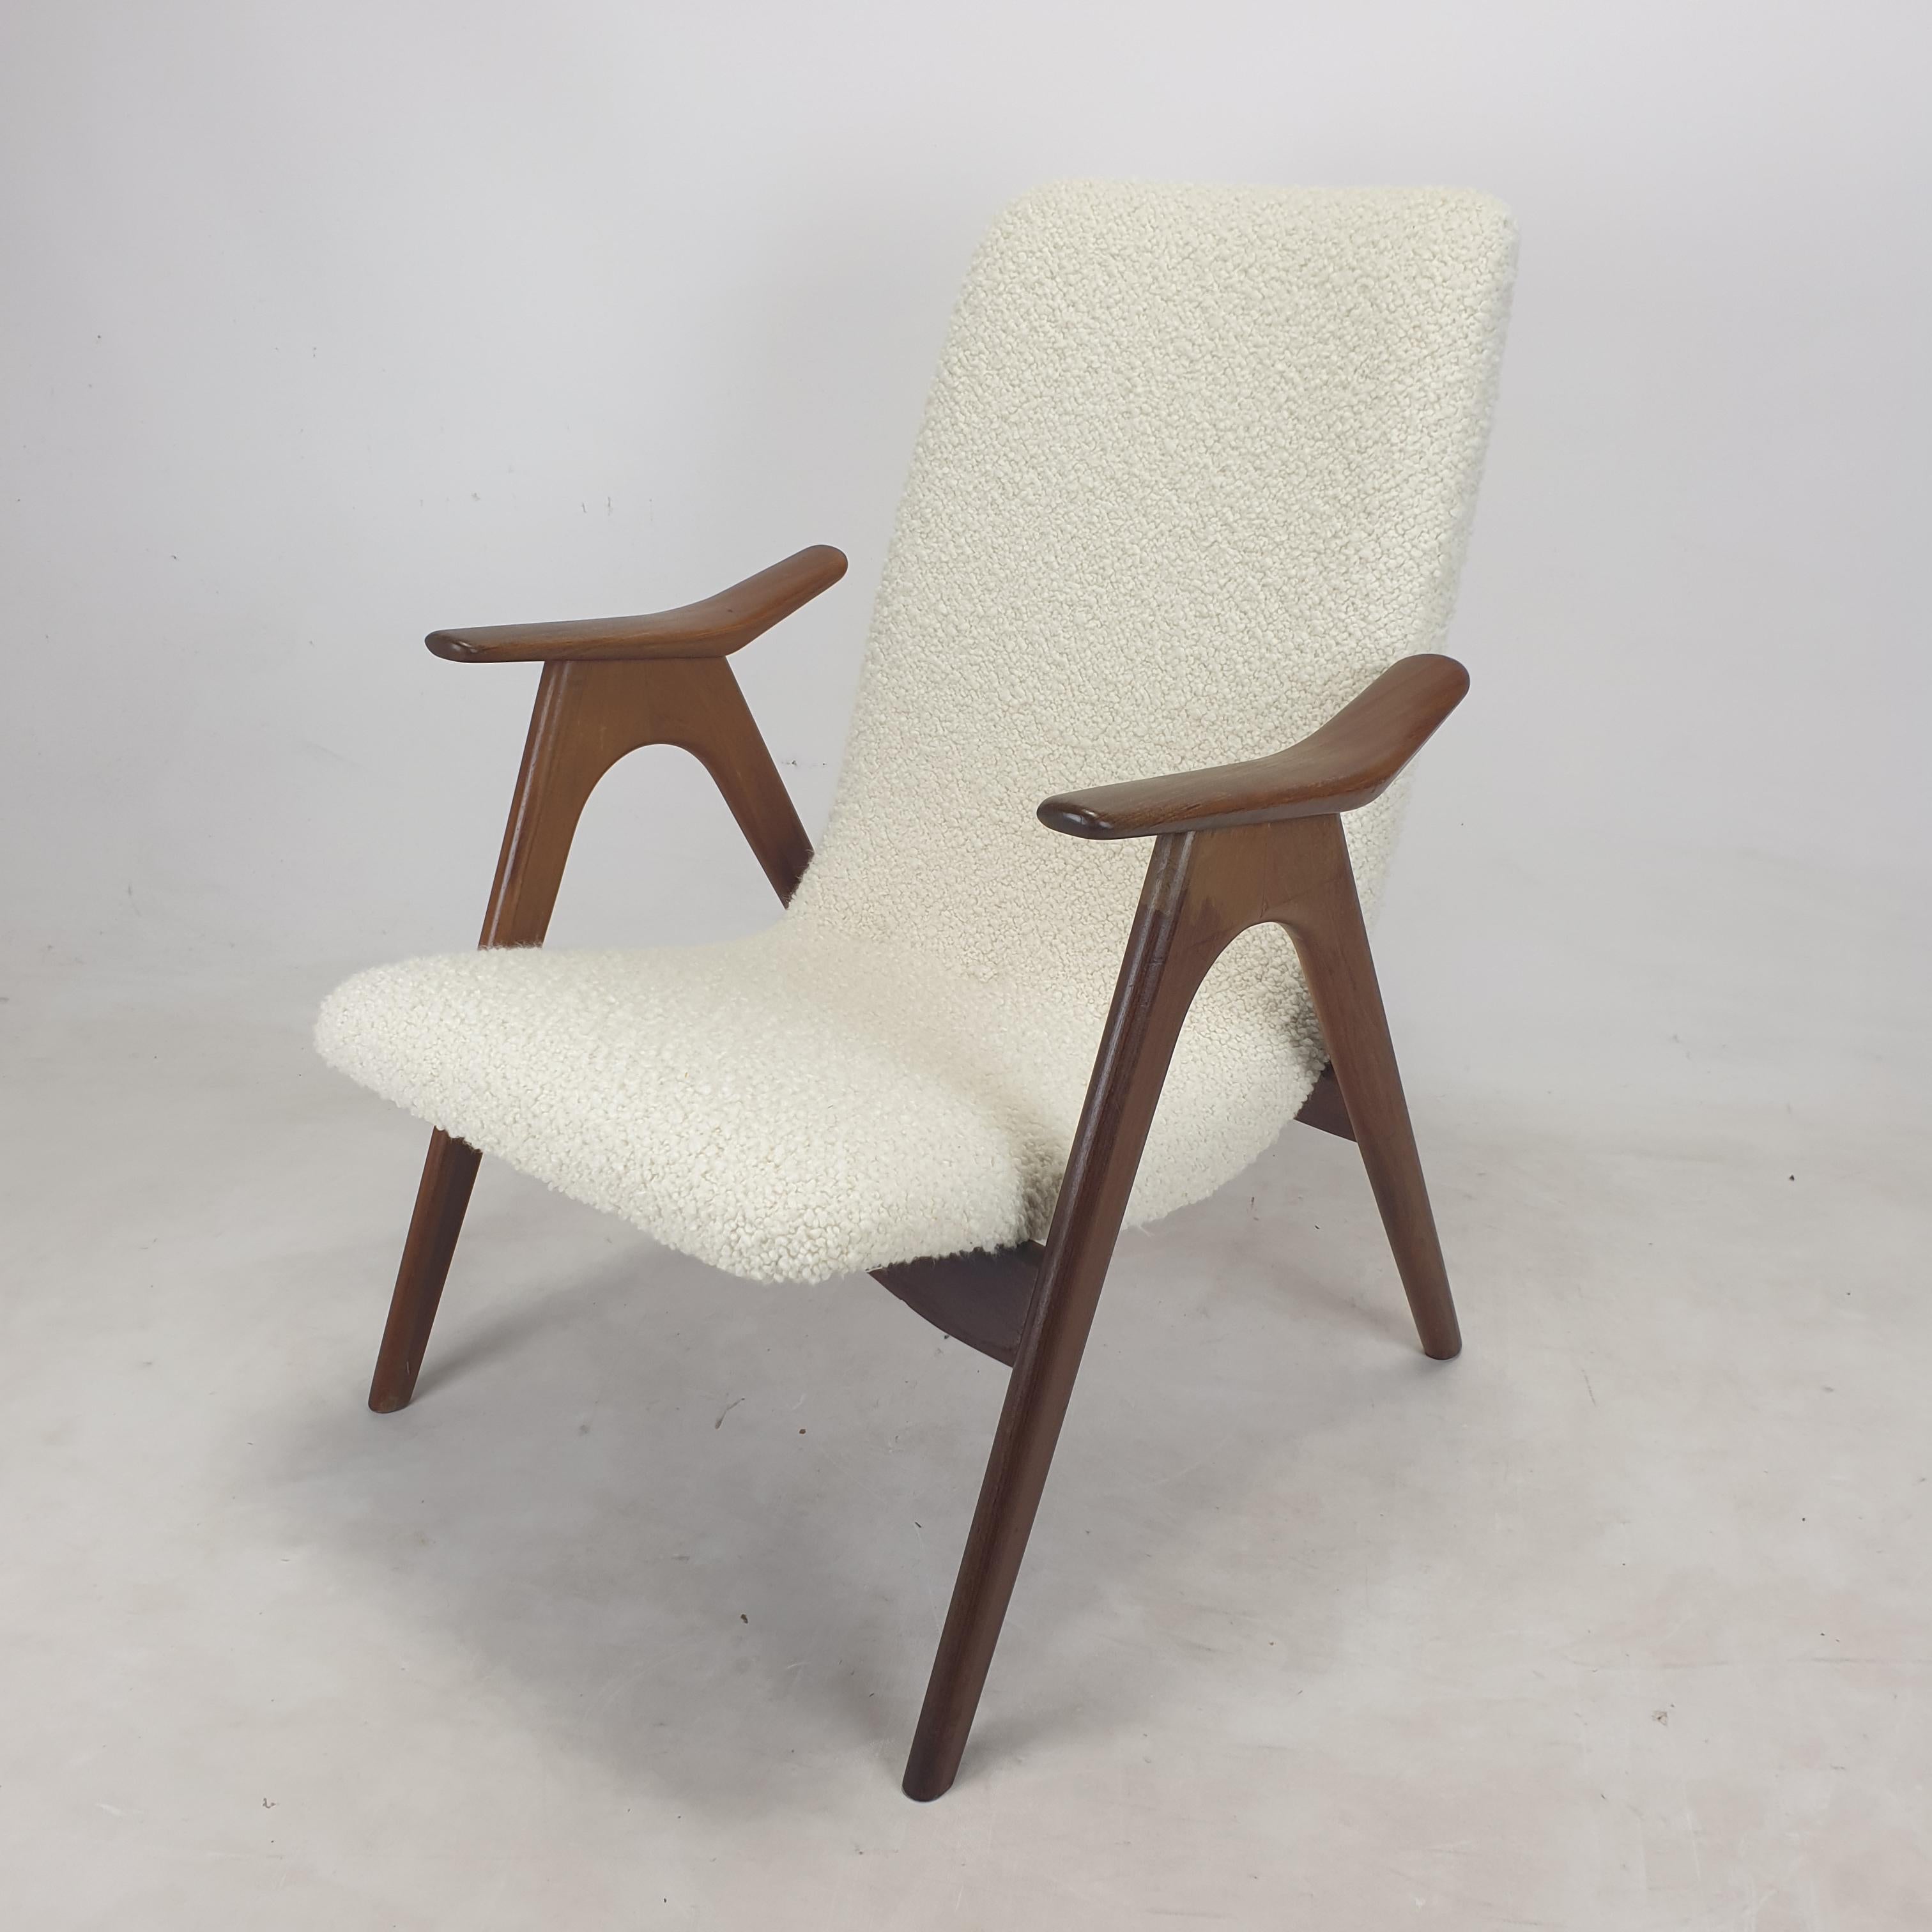 Lovely pair of lounge chairs, fabricated in the 60's by Wébé the Netherlands.
They are designed by Louis van Teeffelen.

The elegant structure of these comfortable chairs is made of teak.

Both chairs of this magnificent set are just